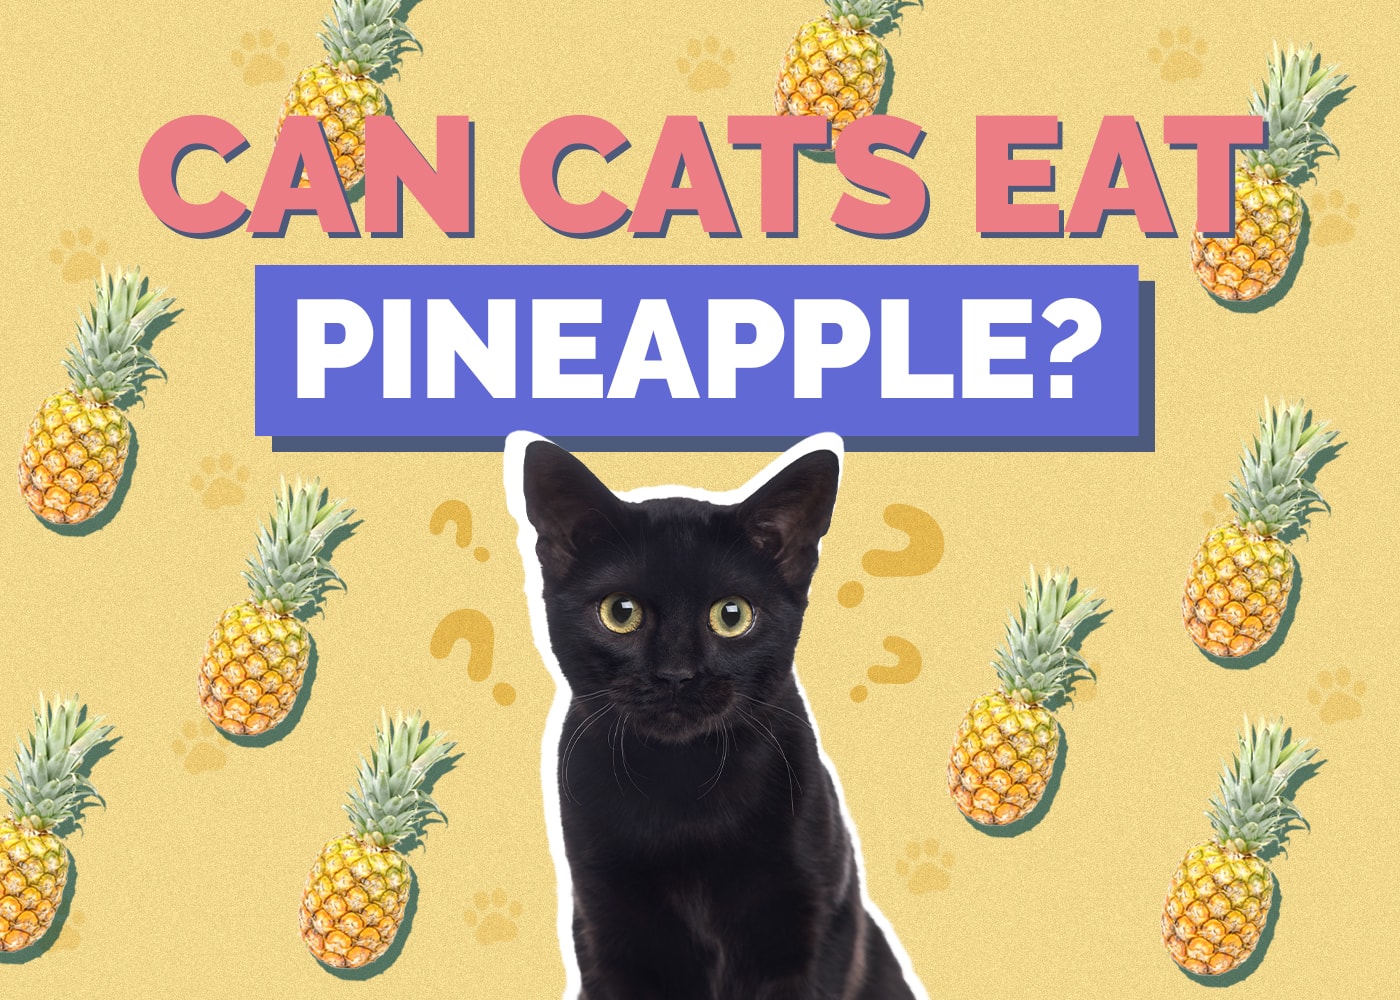 Can Cats Eat pineapple